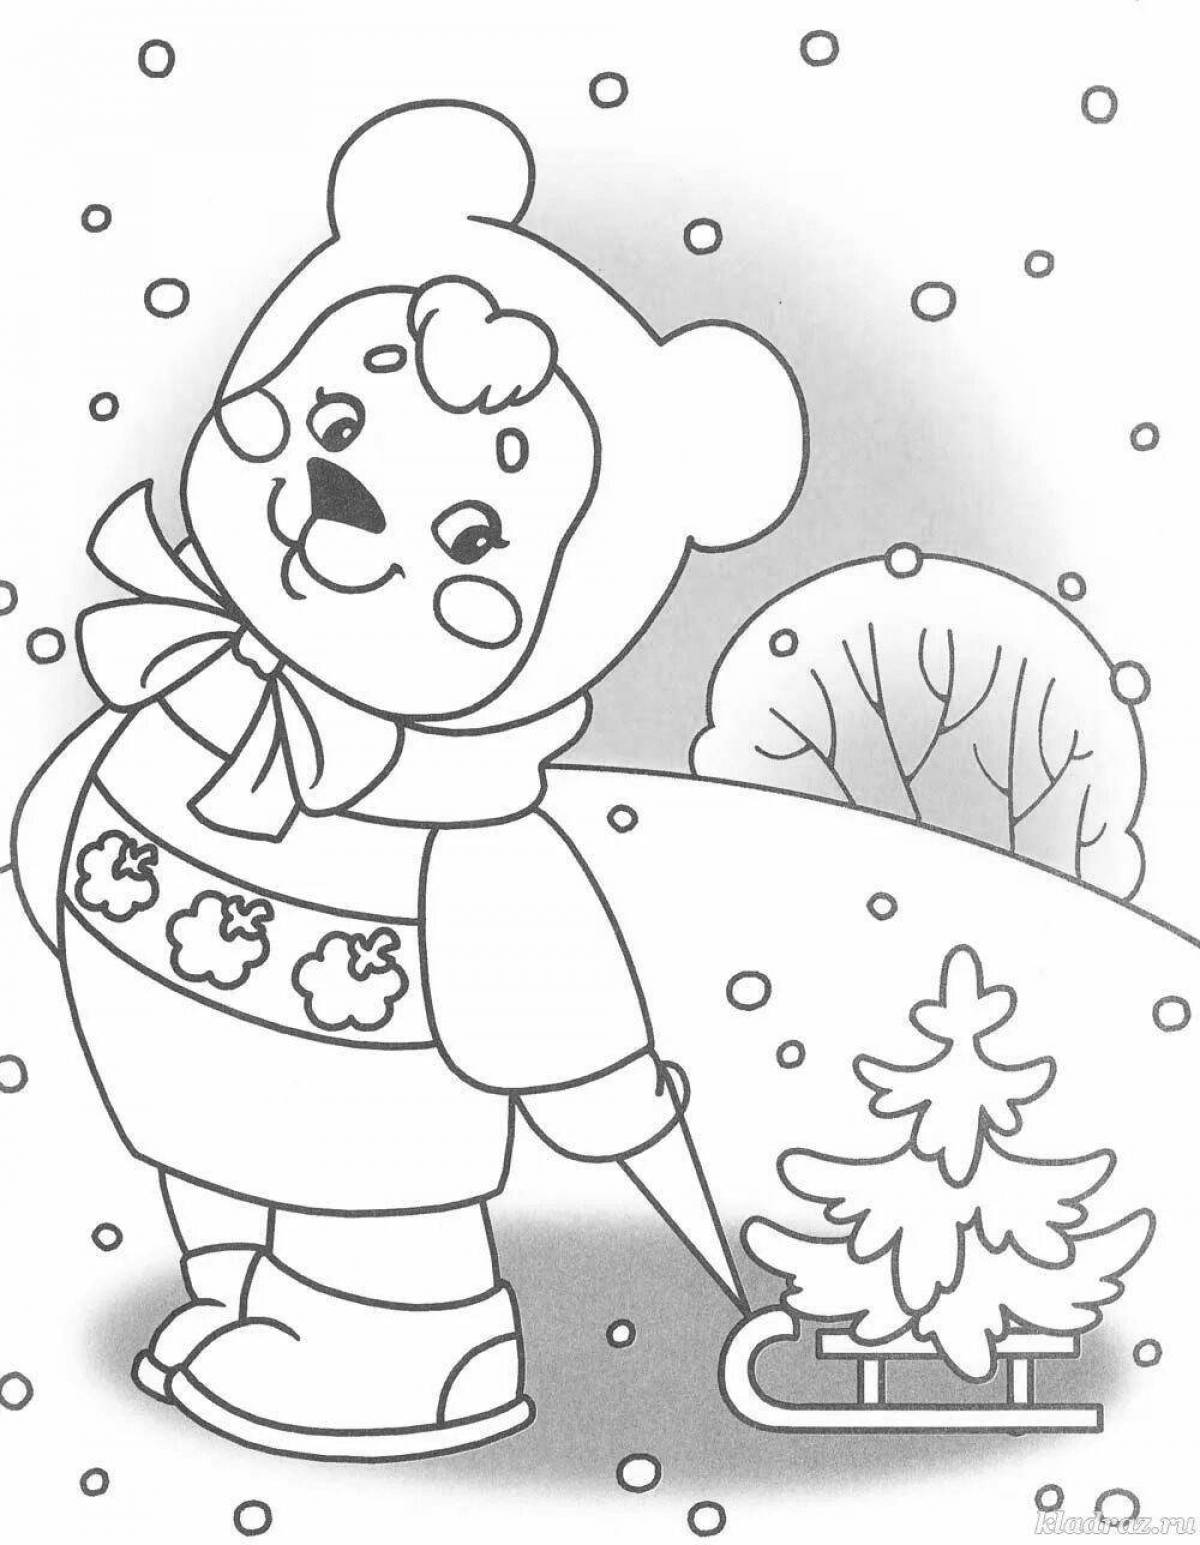 Delightful winter coloring book for 3 year olds